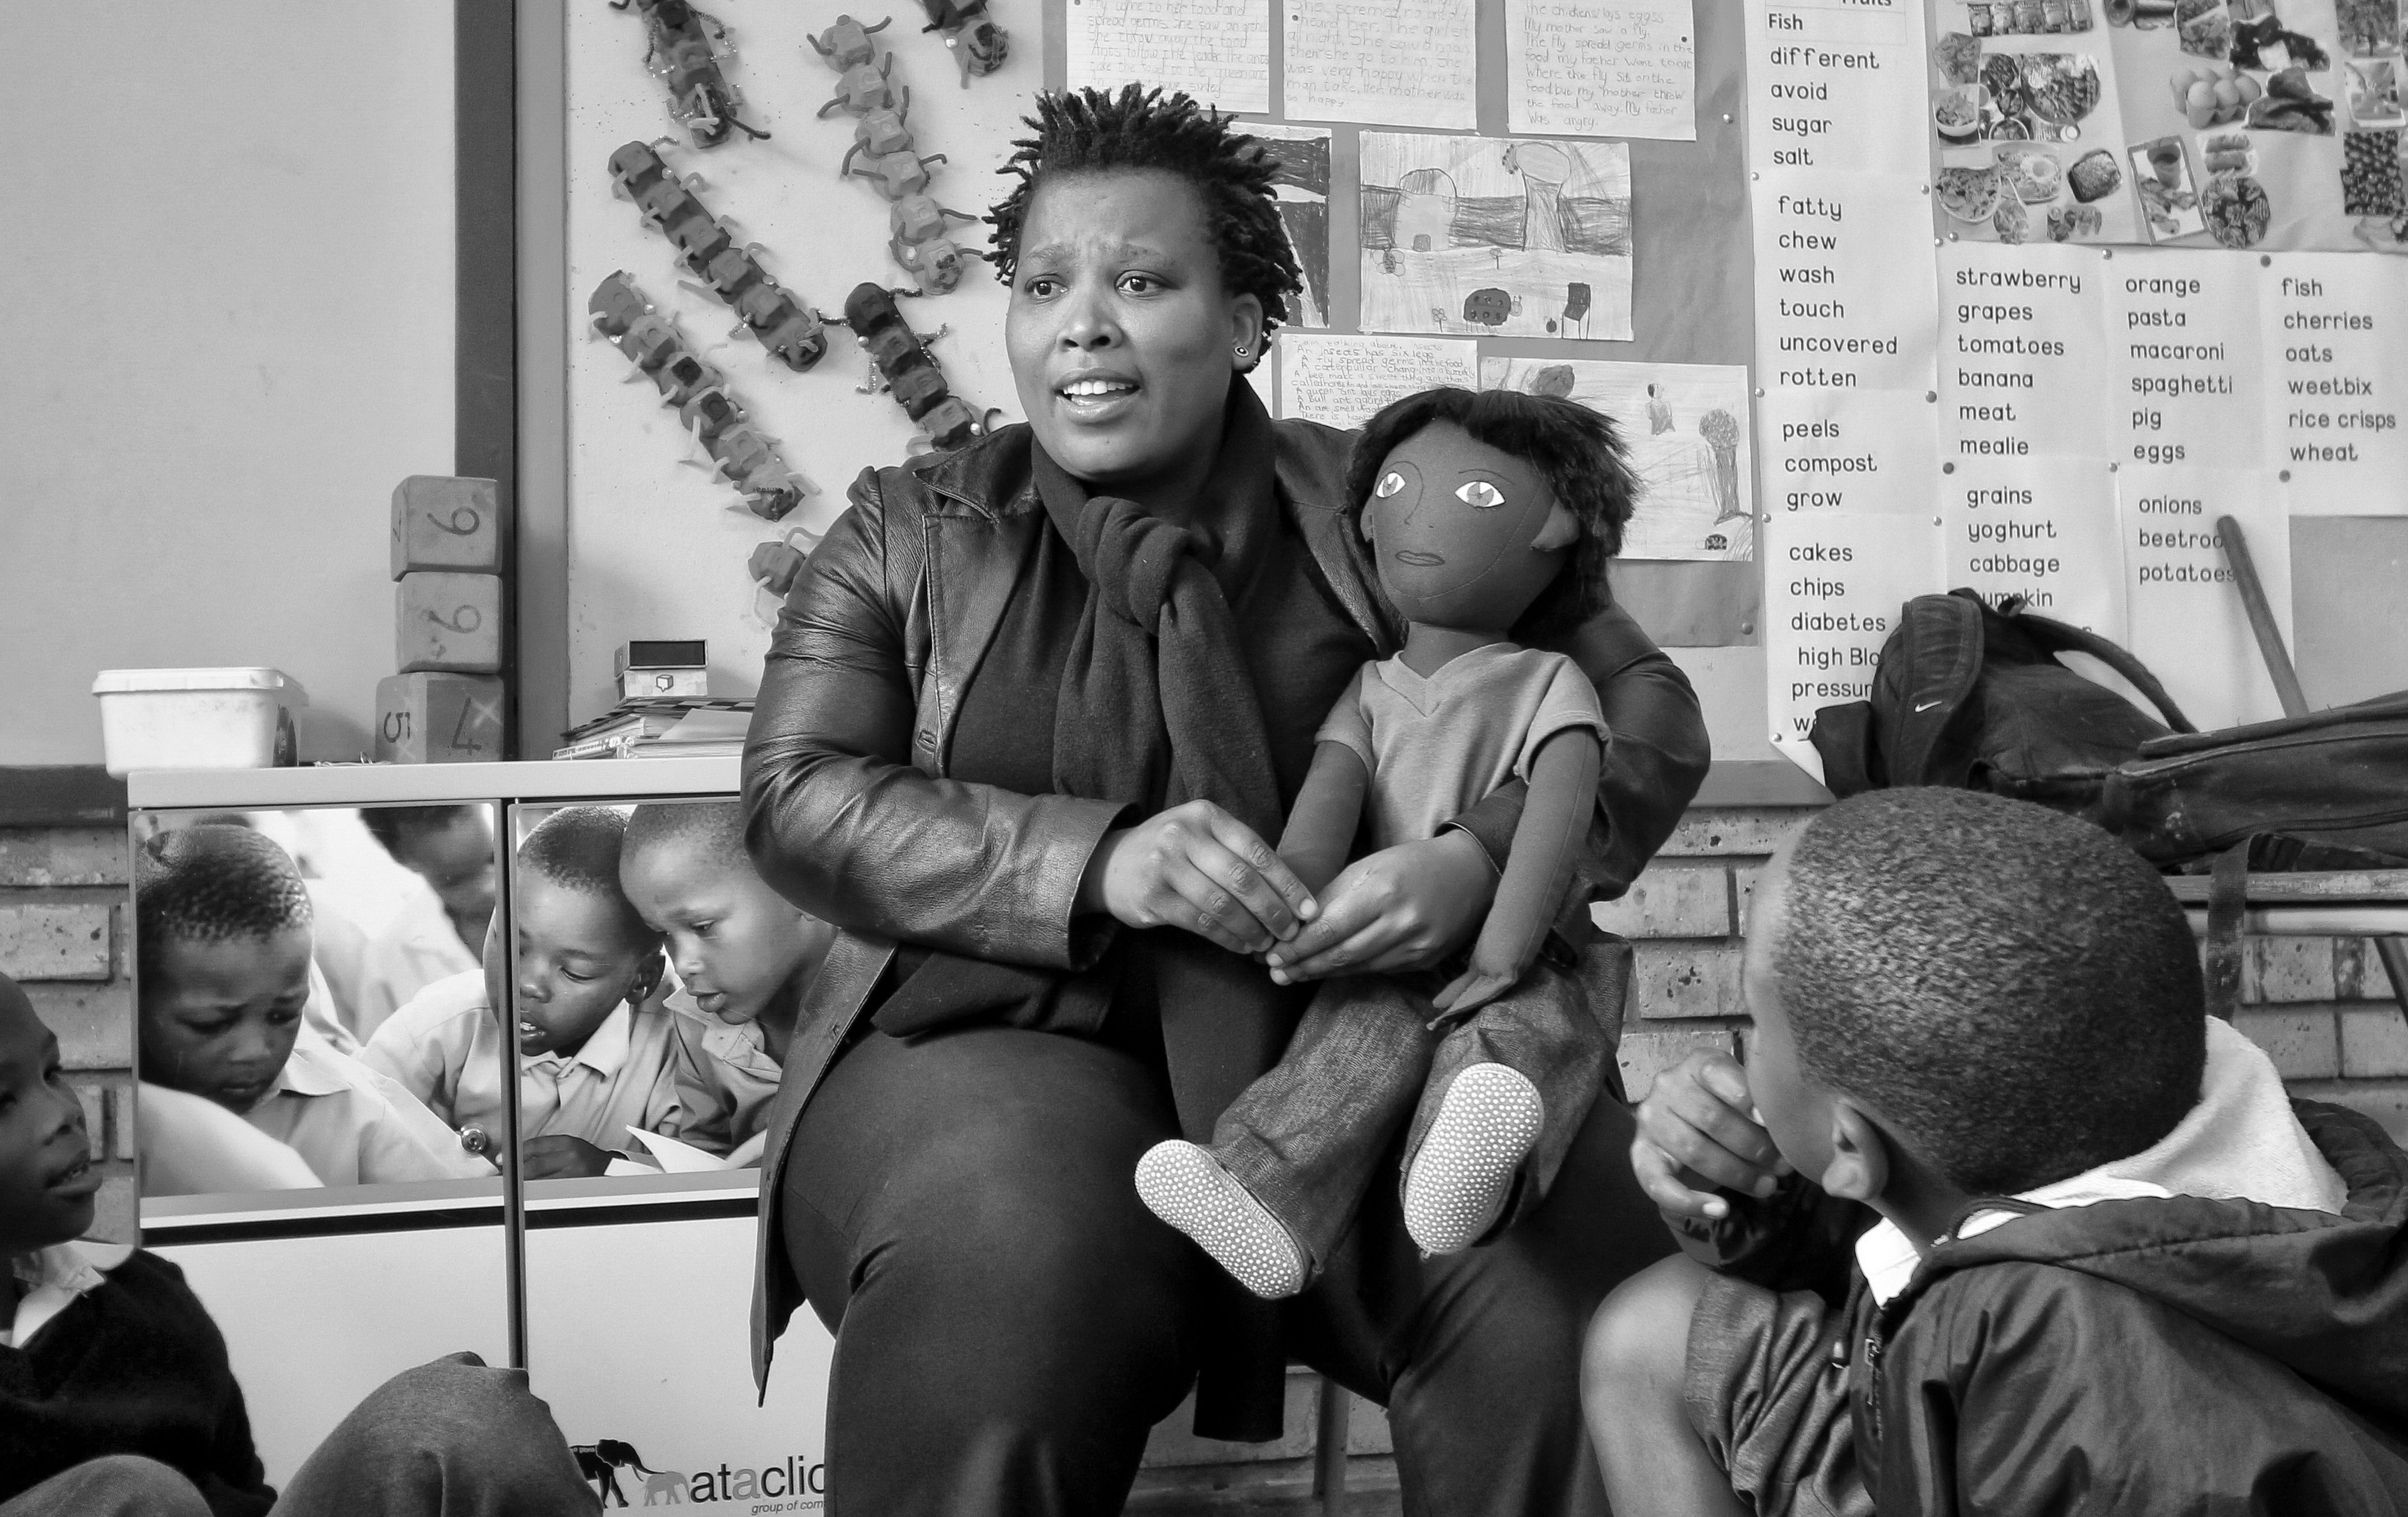 Hanna Phemba and the Persona doll the children named Thabo. 